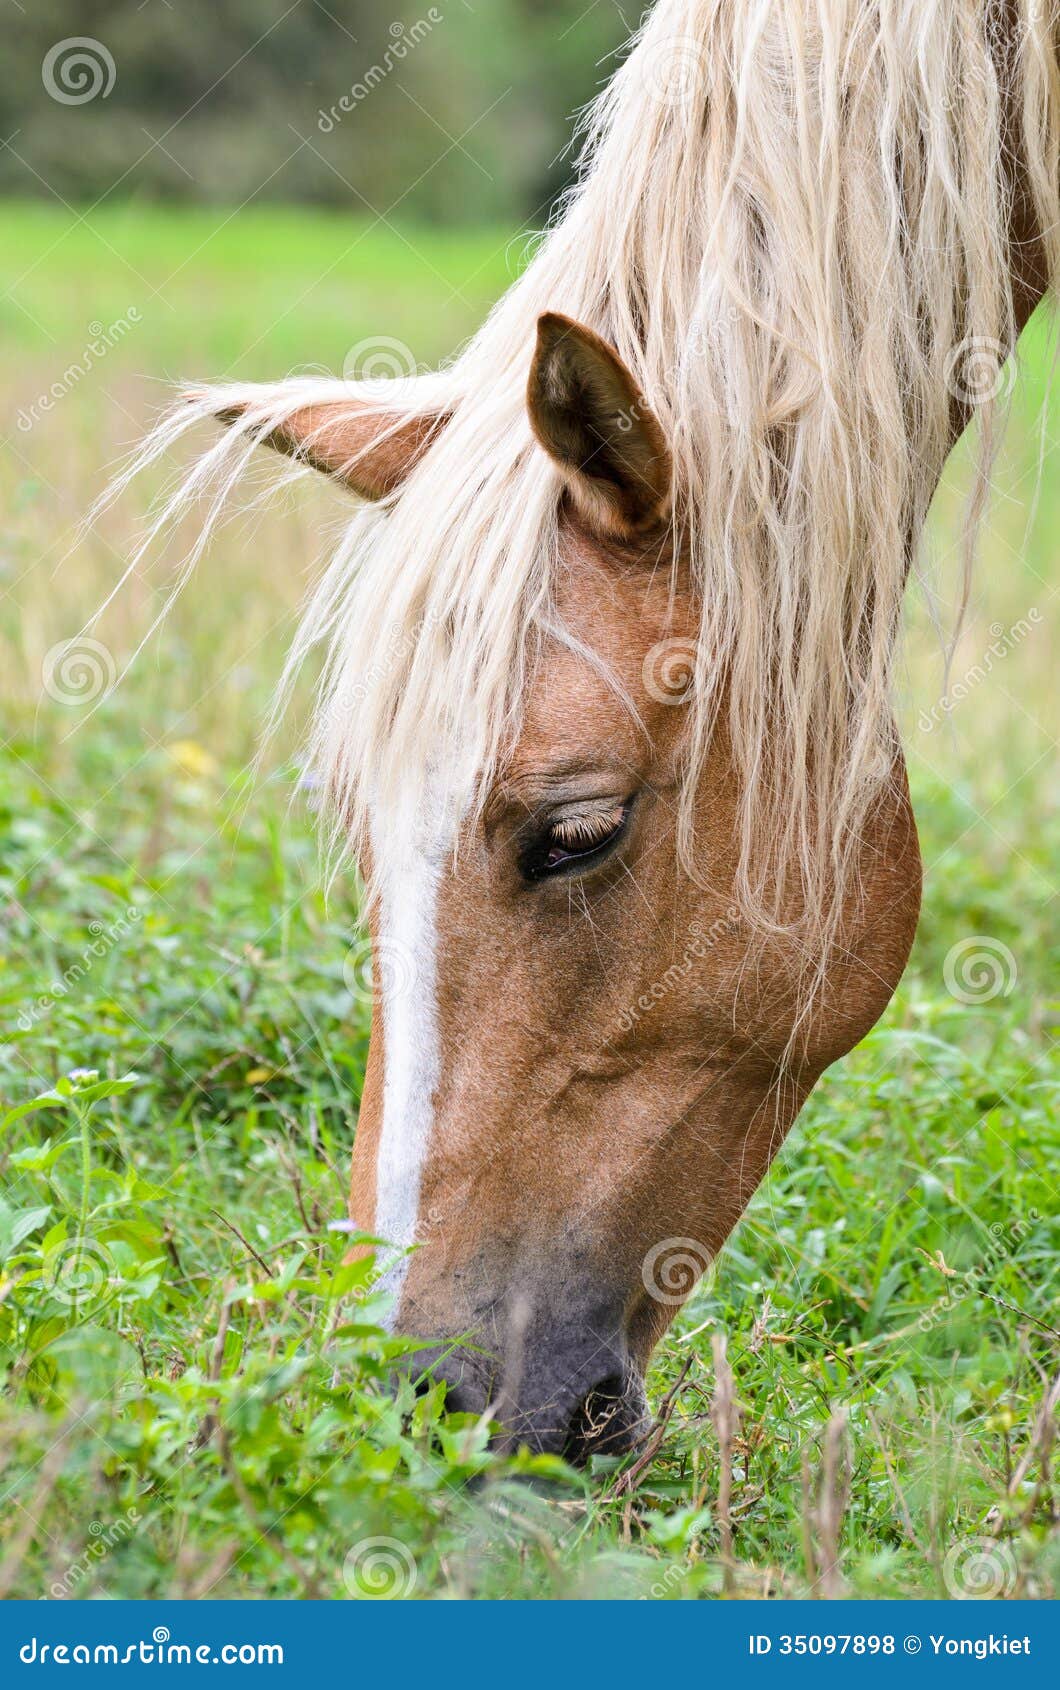 Close-up face of the horse stock photo. Image of farm ...